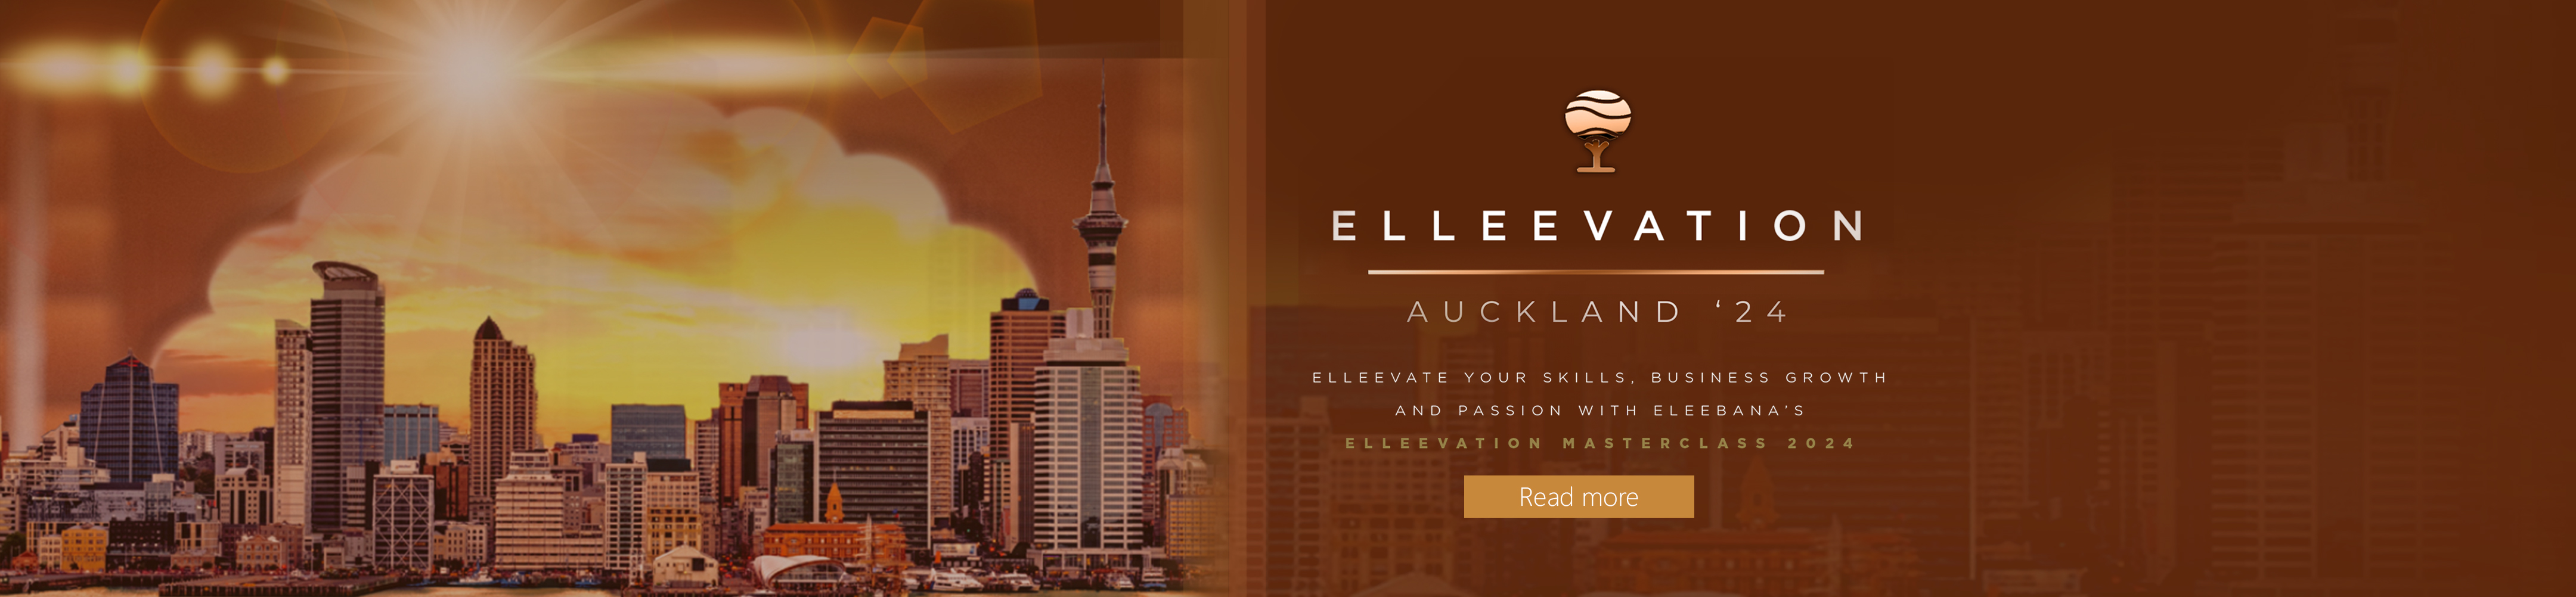 Don't miss your only opportunity this year to attend the Elleevation Masterclass in Auckland!